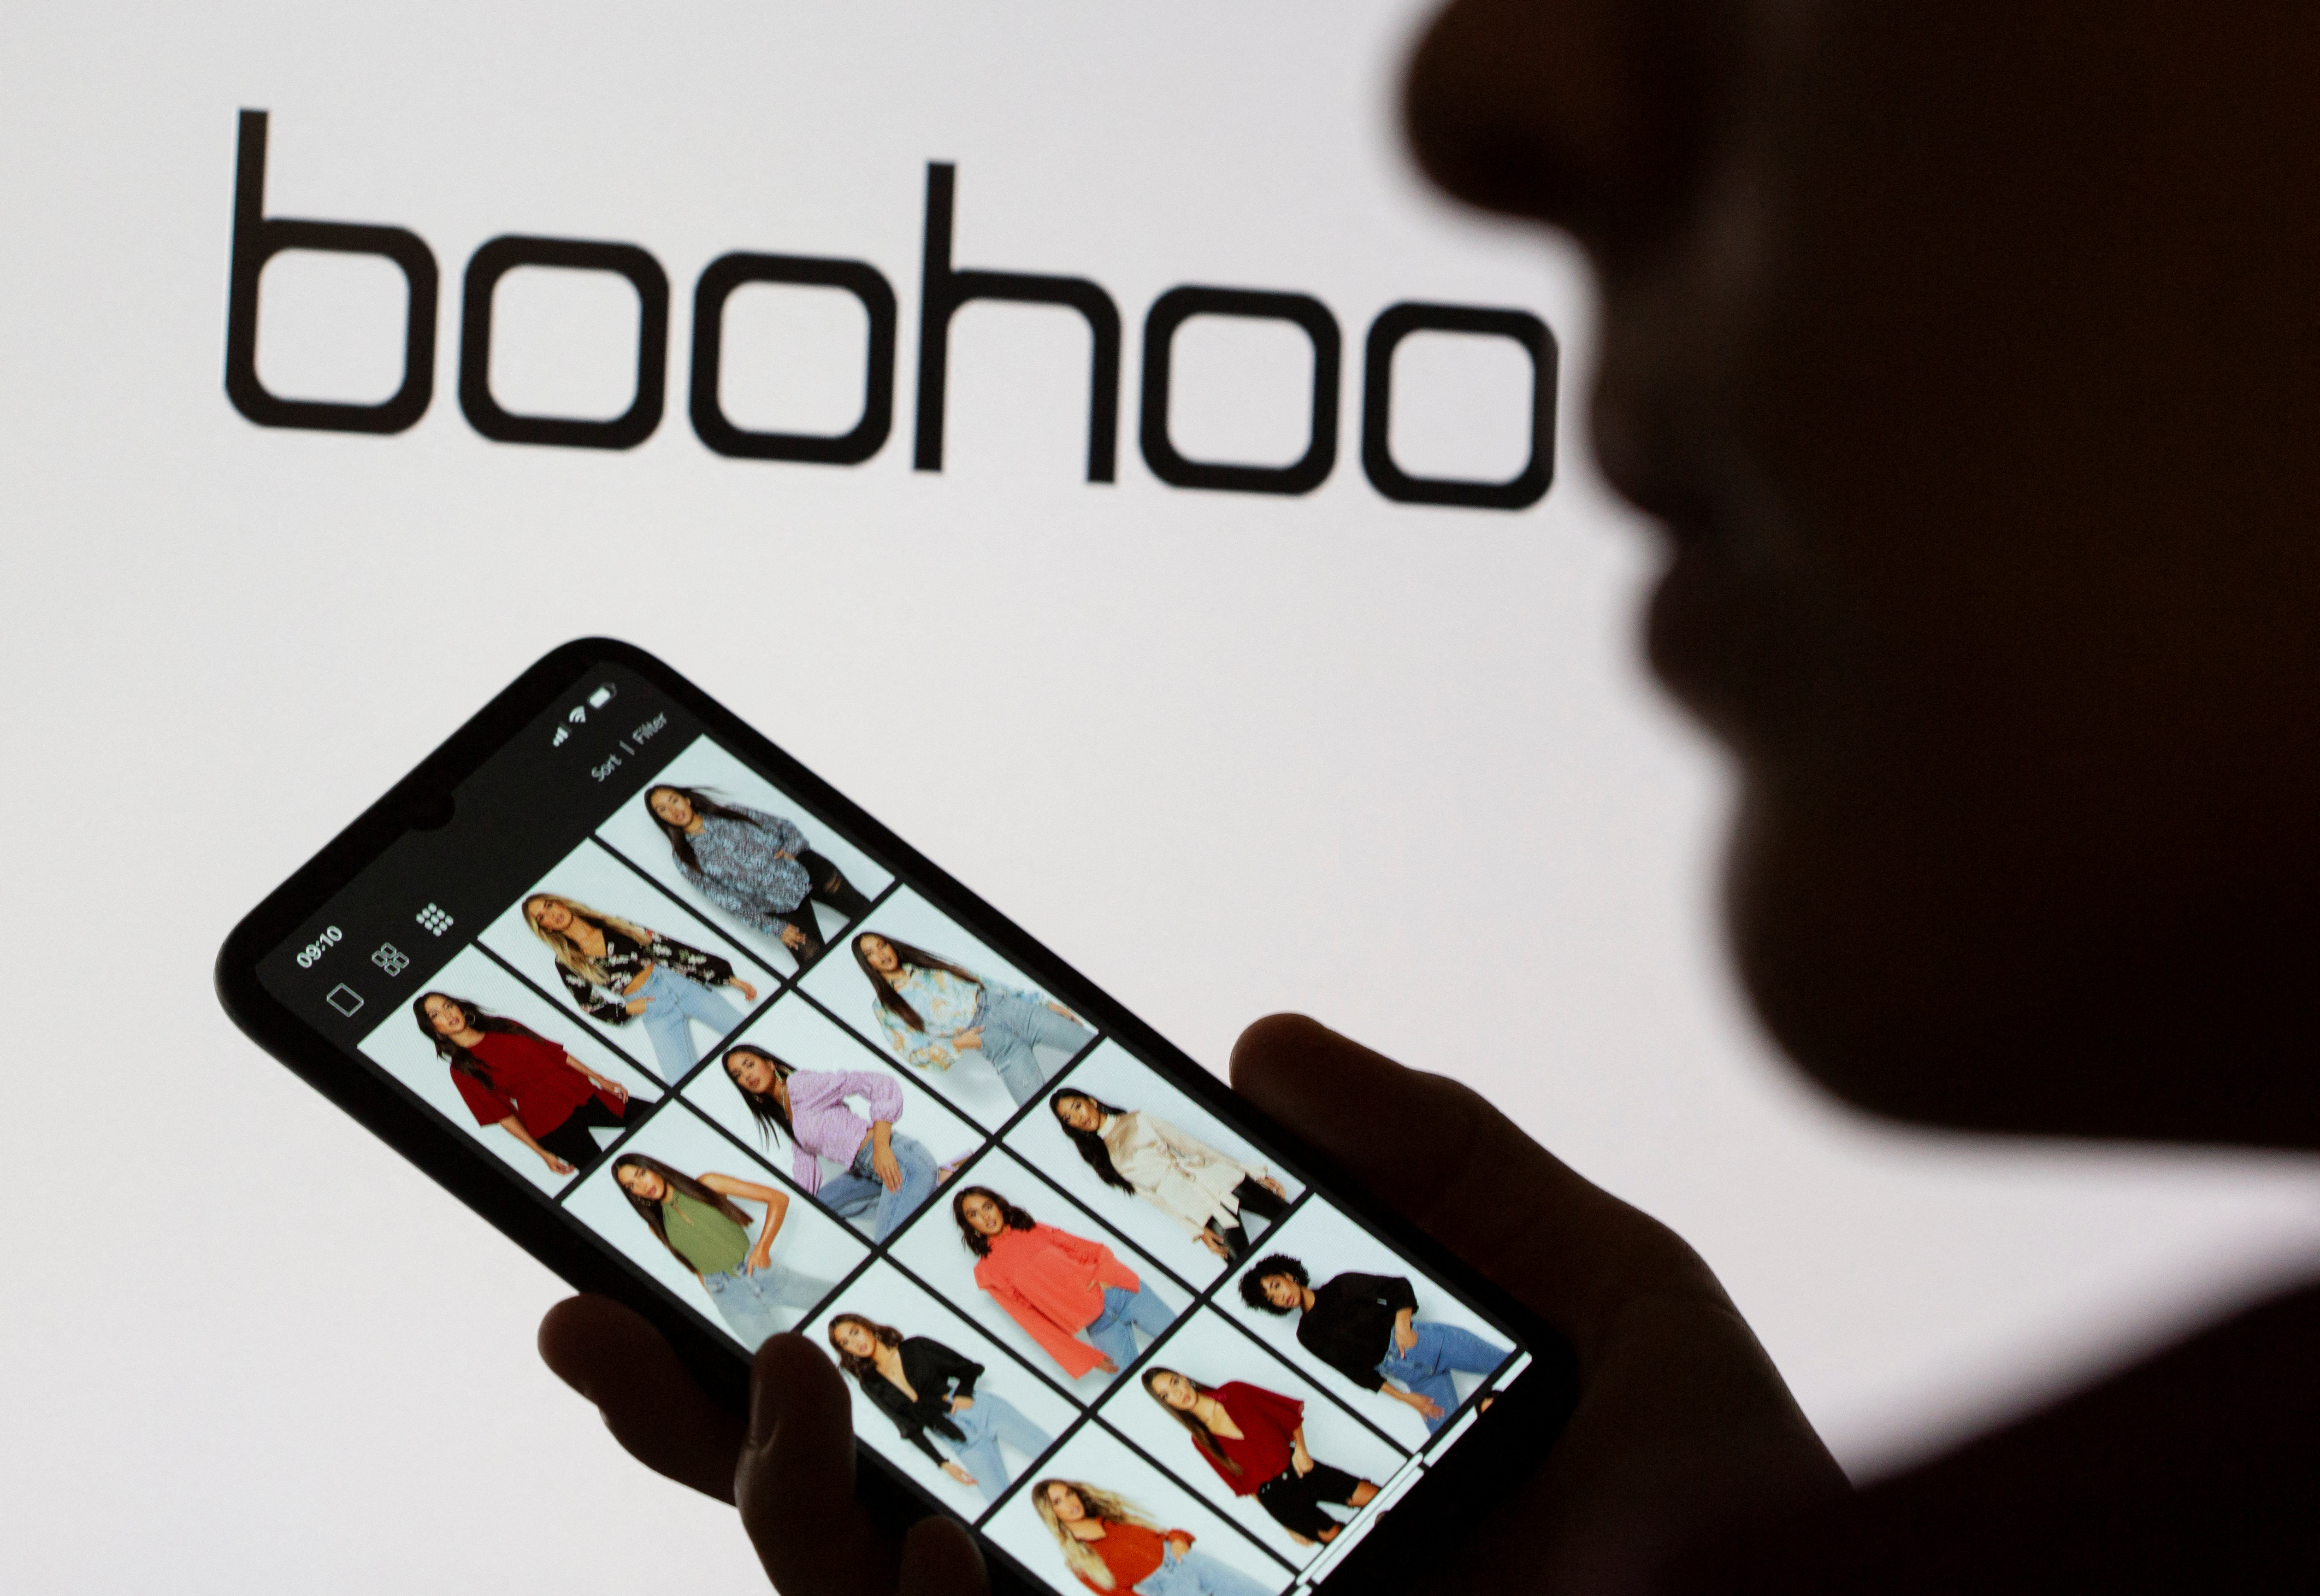 A woman poses with a smartphone showing the Boohoo app in front of the Boohoo logo on display in this illustration